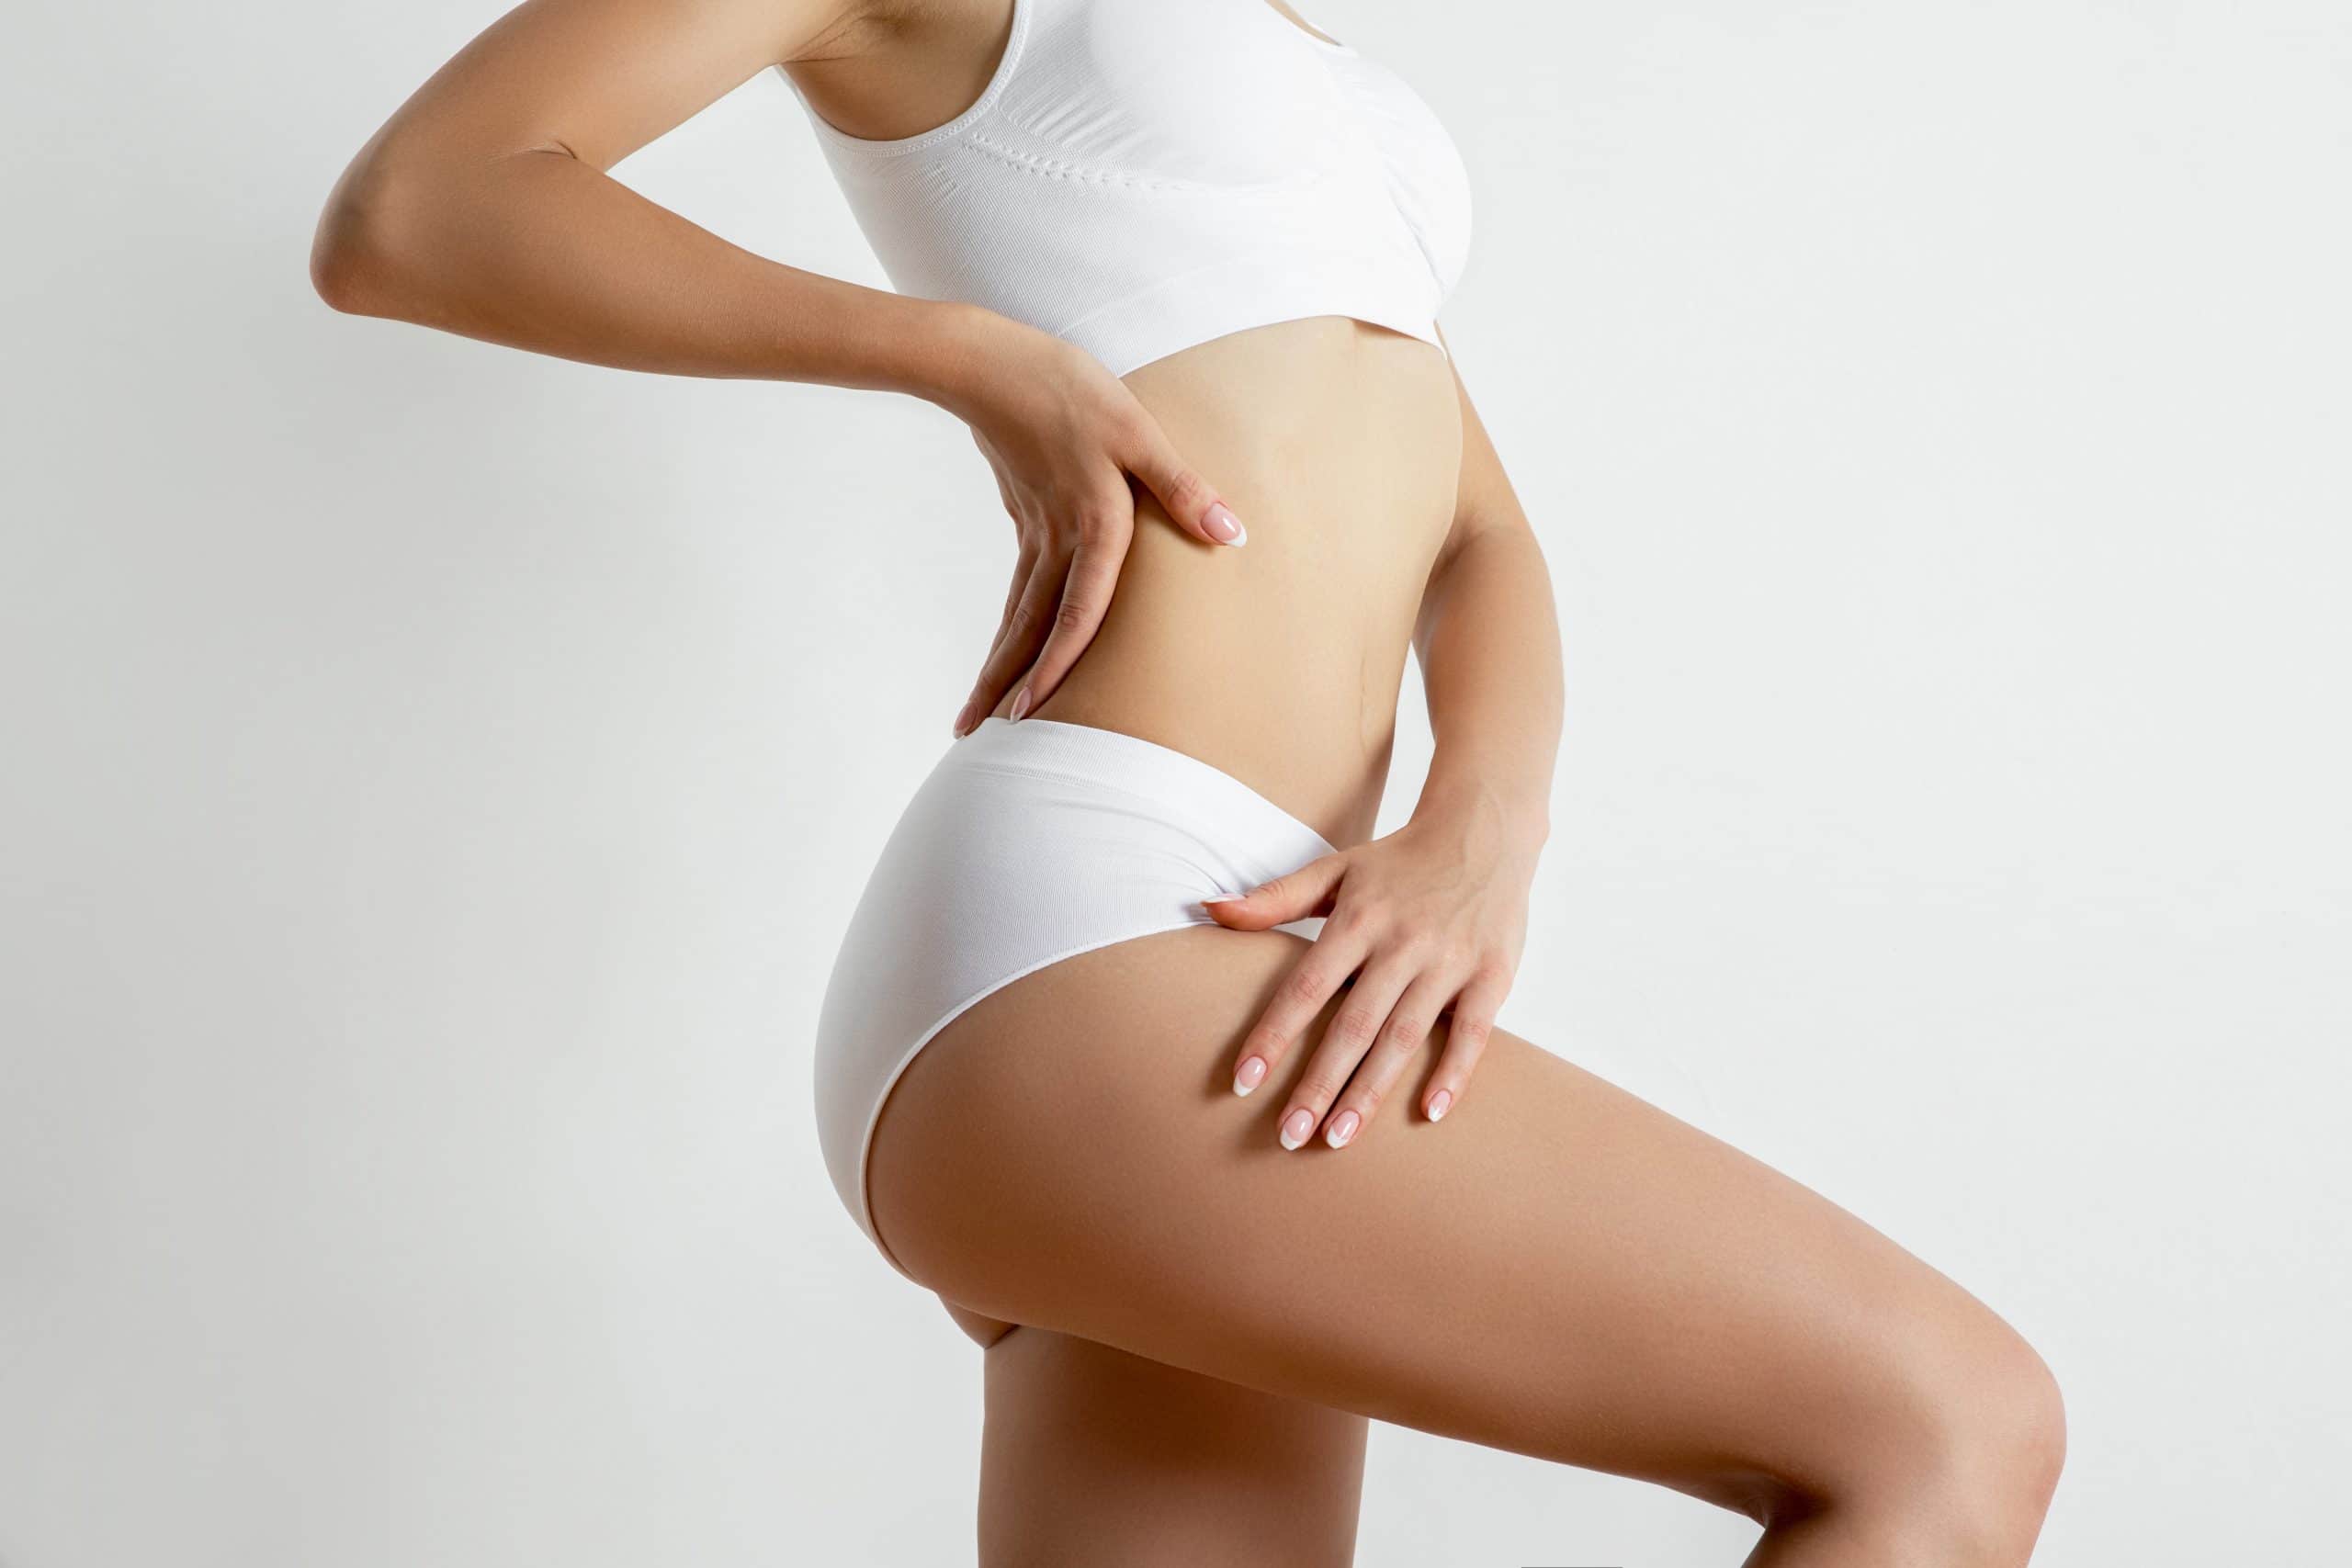 BeautiFill Liposuction And Fat Transfer Can Help You Achieve The Proportionate Figure You Desire